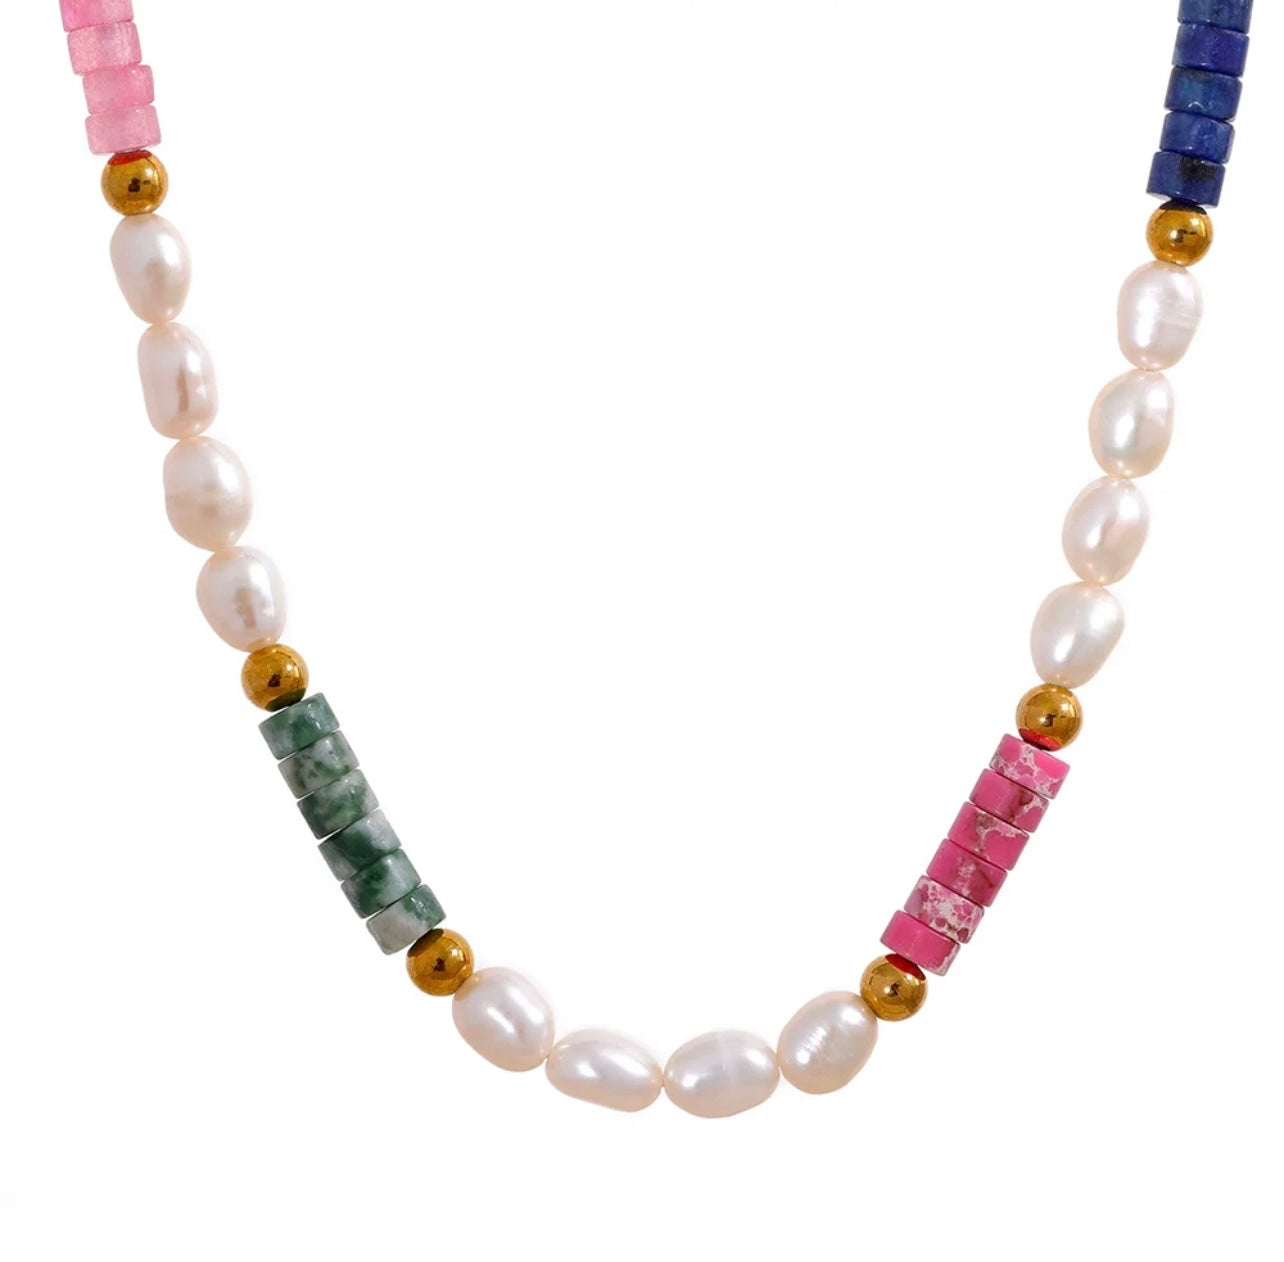 Euro Summer - Gold / Freshwater Pearl Necklace